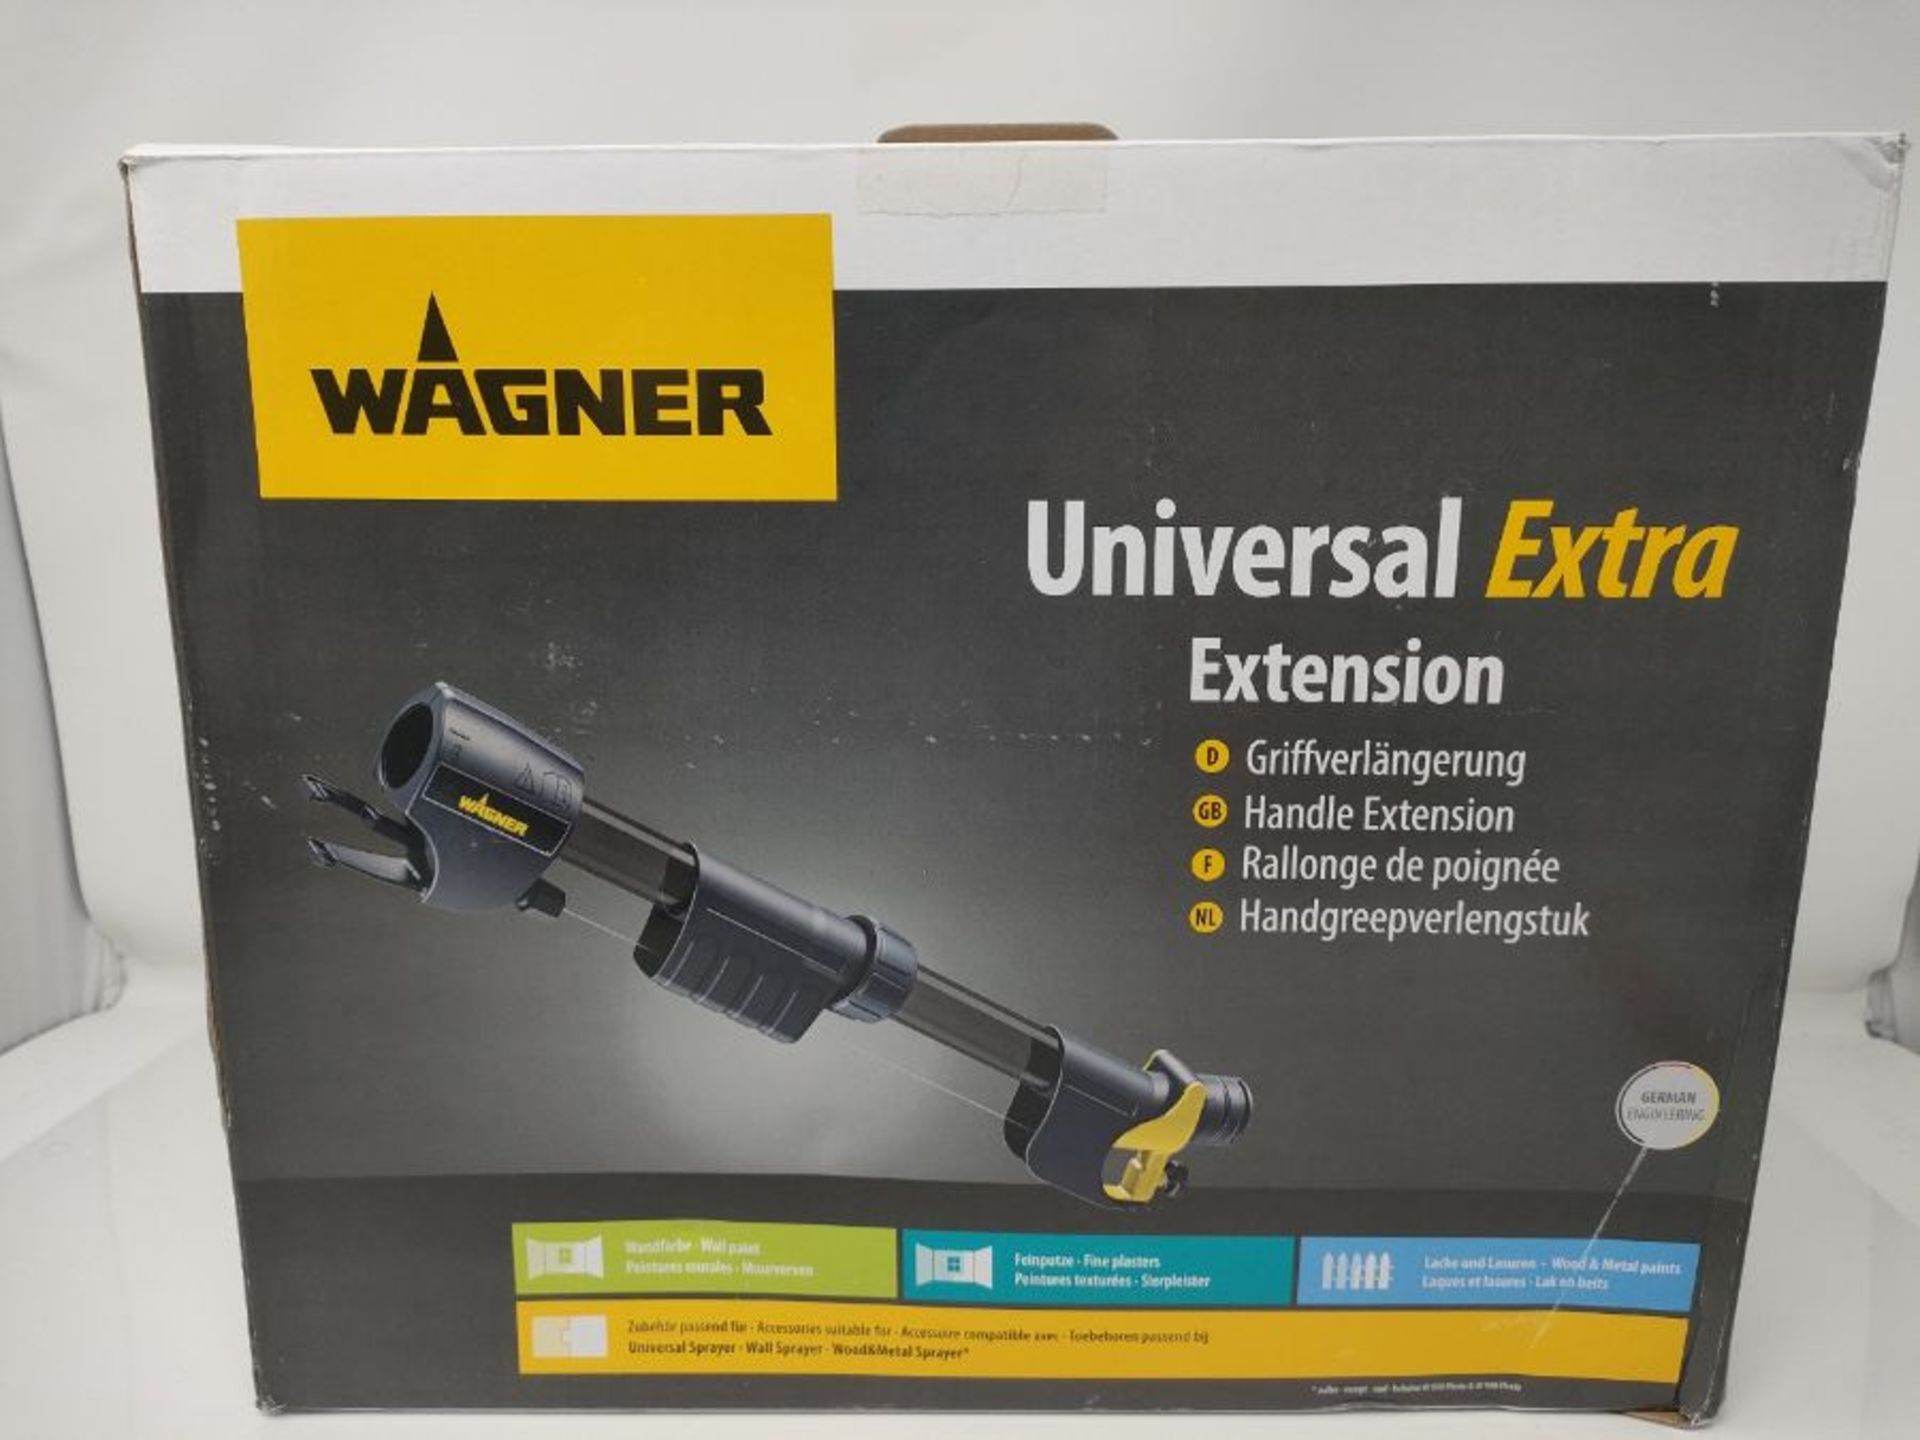 Wagner Handle extension for high ceilings, walls or floors, 60 cm - Image 2 of 3